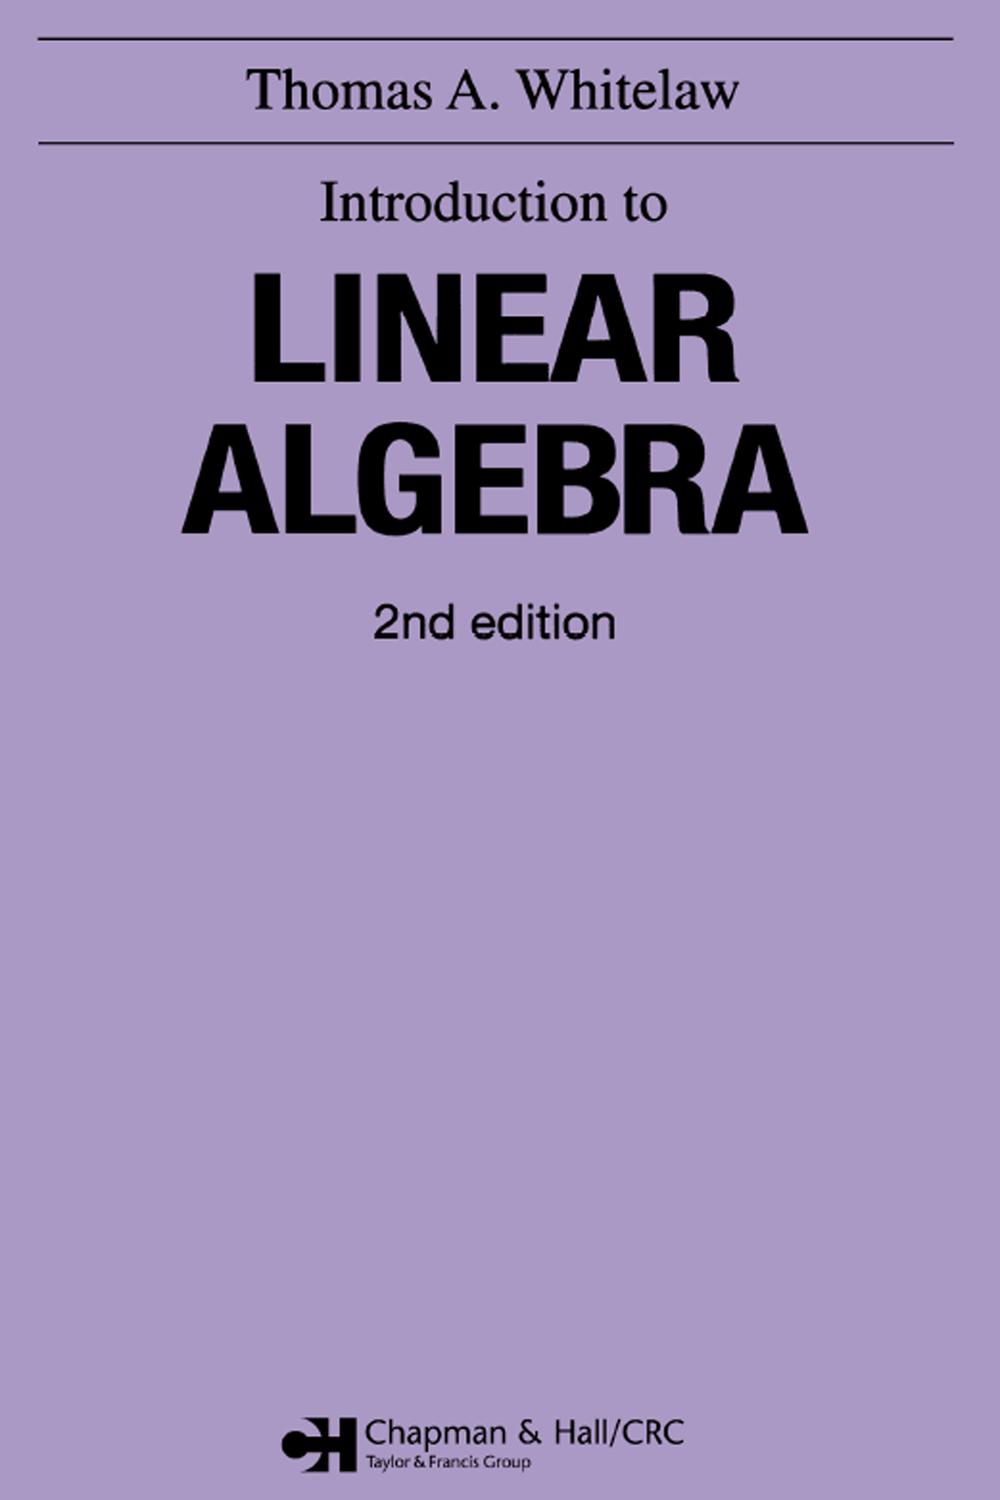 Introduction to Linear Algebra, 2nd edition - Thomas A Whitelaw,,